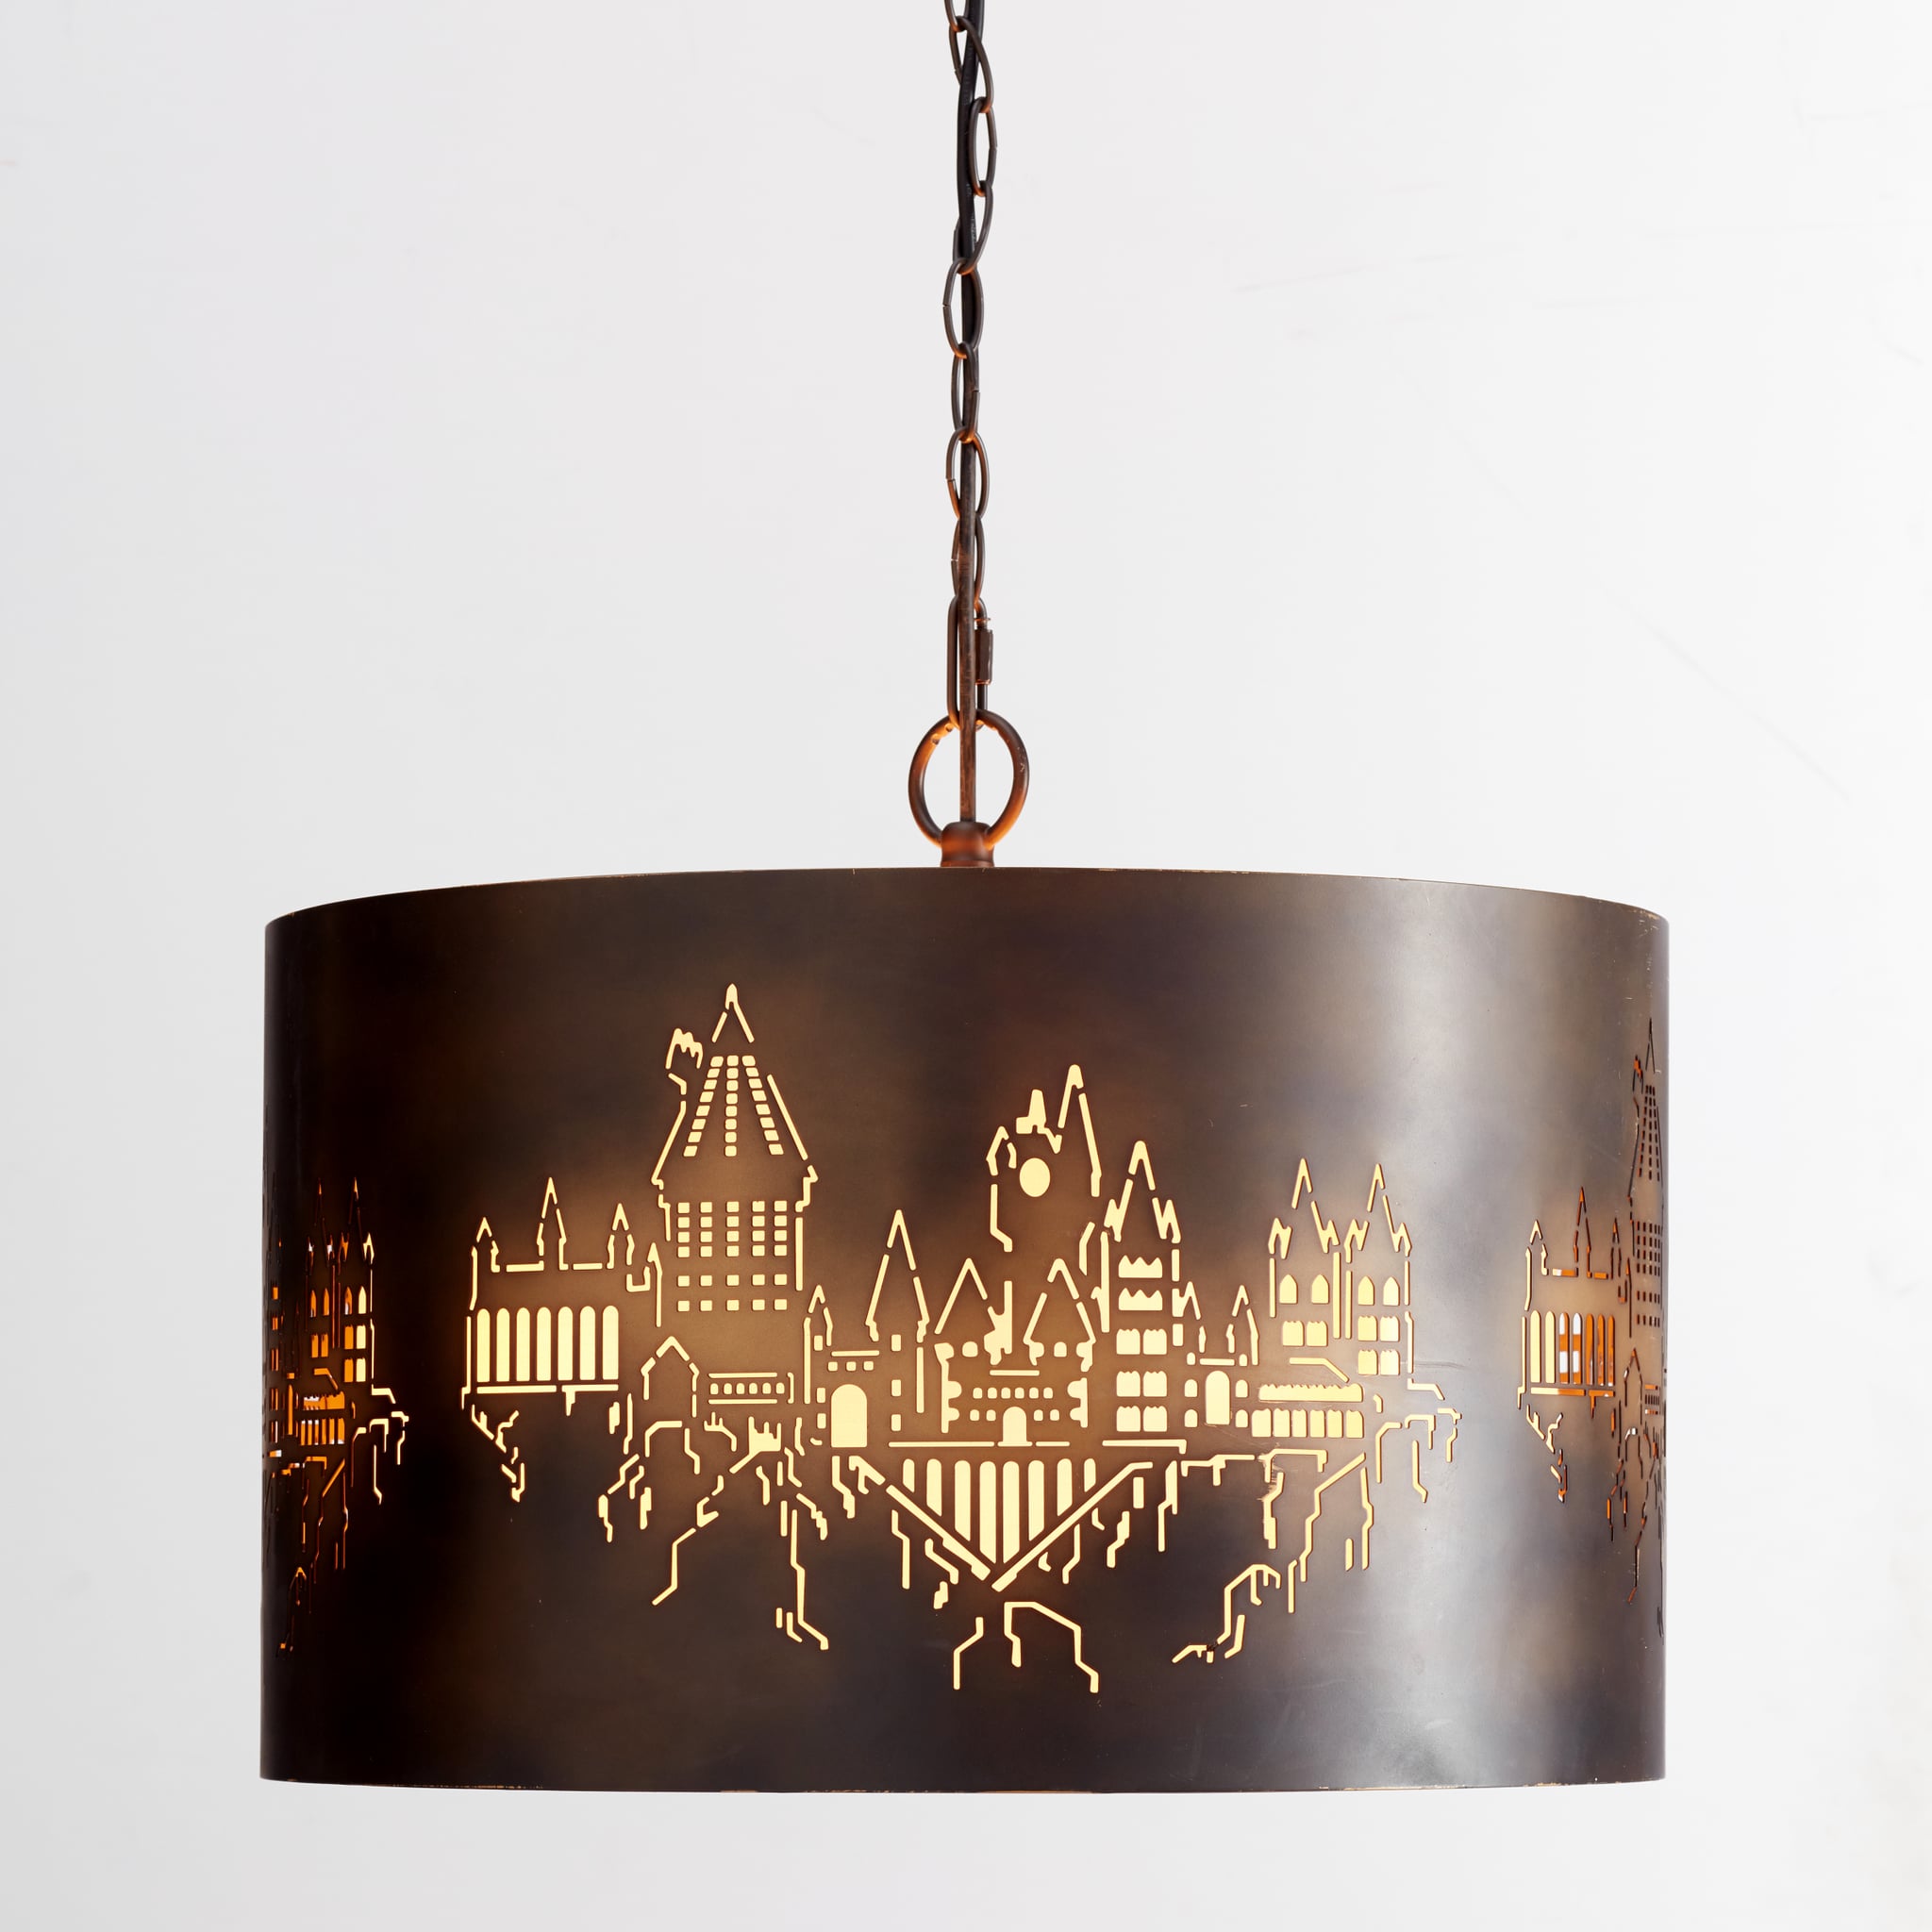 Cast A Hogwarts Spell On Any Room With This Amazing Pendant